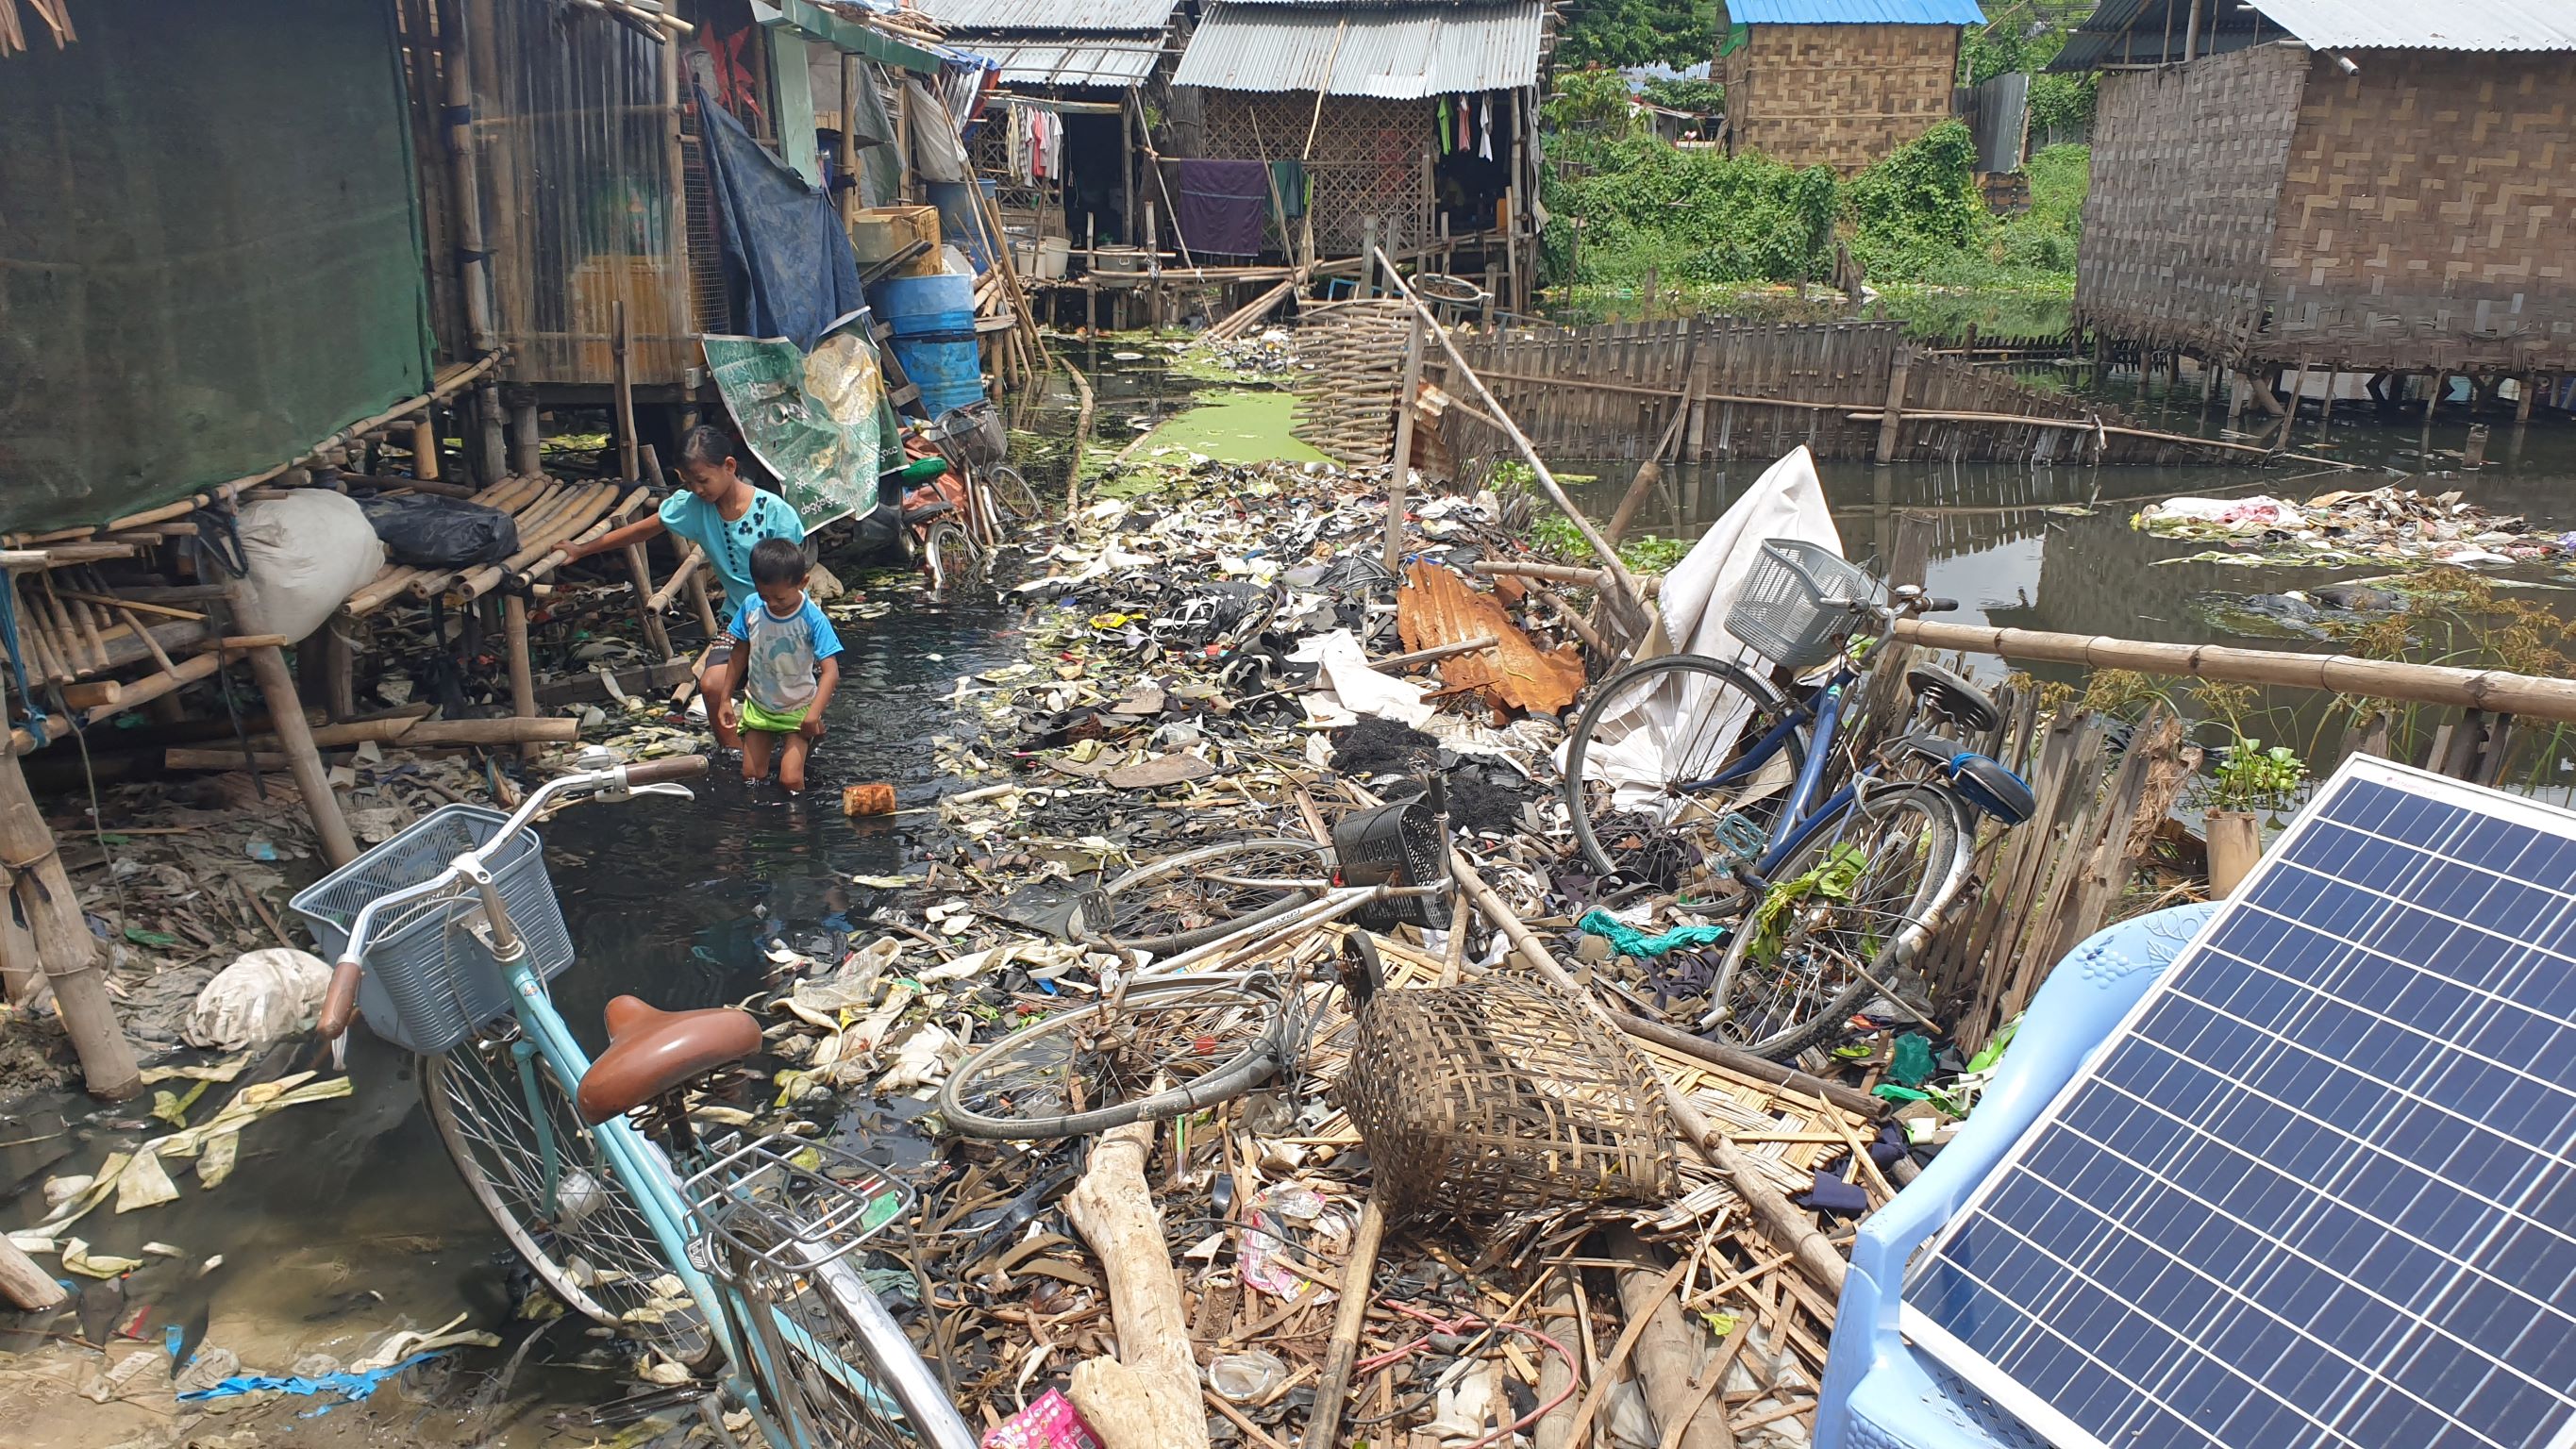 Foreign plastic waste is dumped throughout Ward 27, an informal community in Yangon township, where residents are fearful of speaking out due to repercussions from Myanmar’s military junta